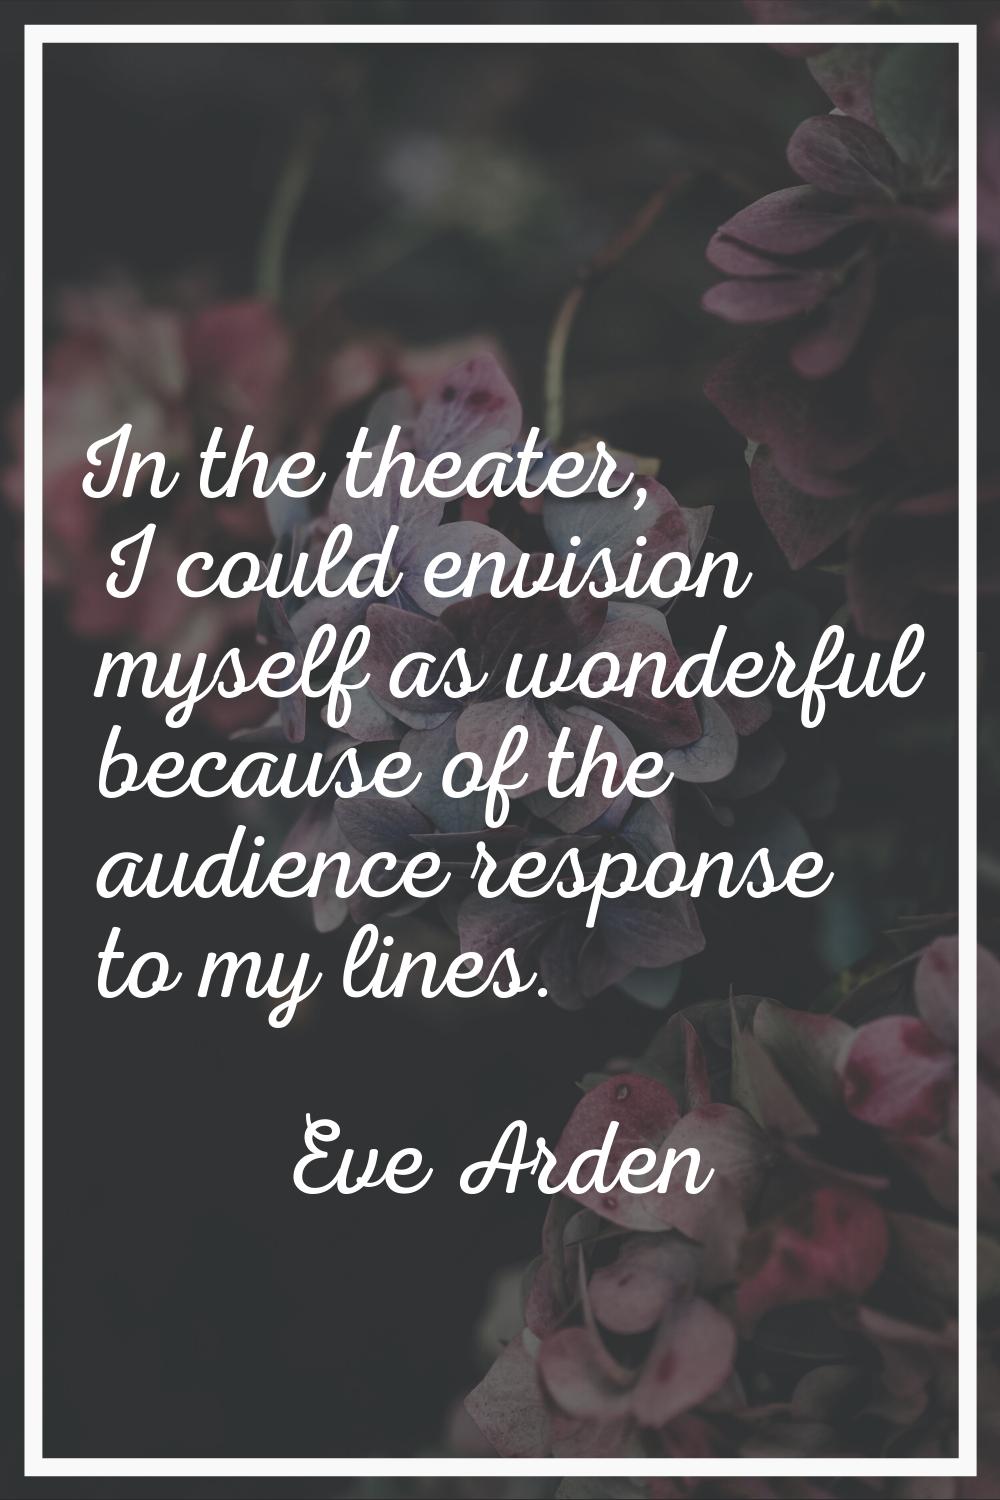 In the theater, I could envision myself as wonderful because of the audience response to my lines.